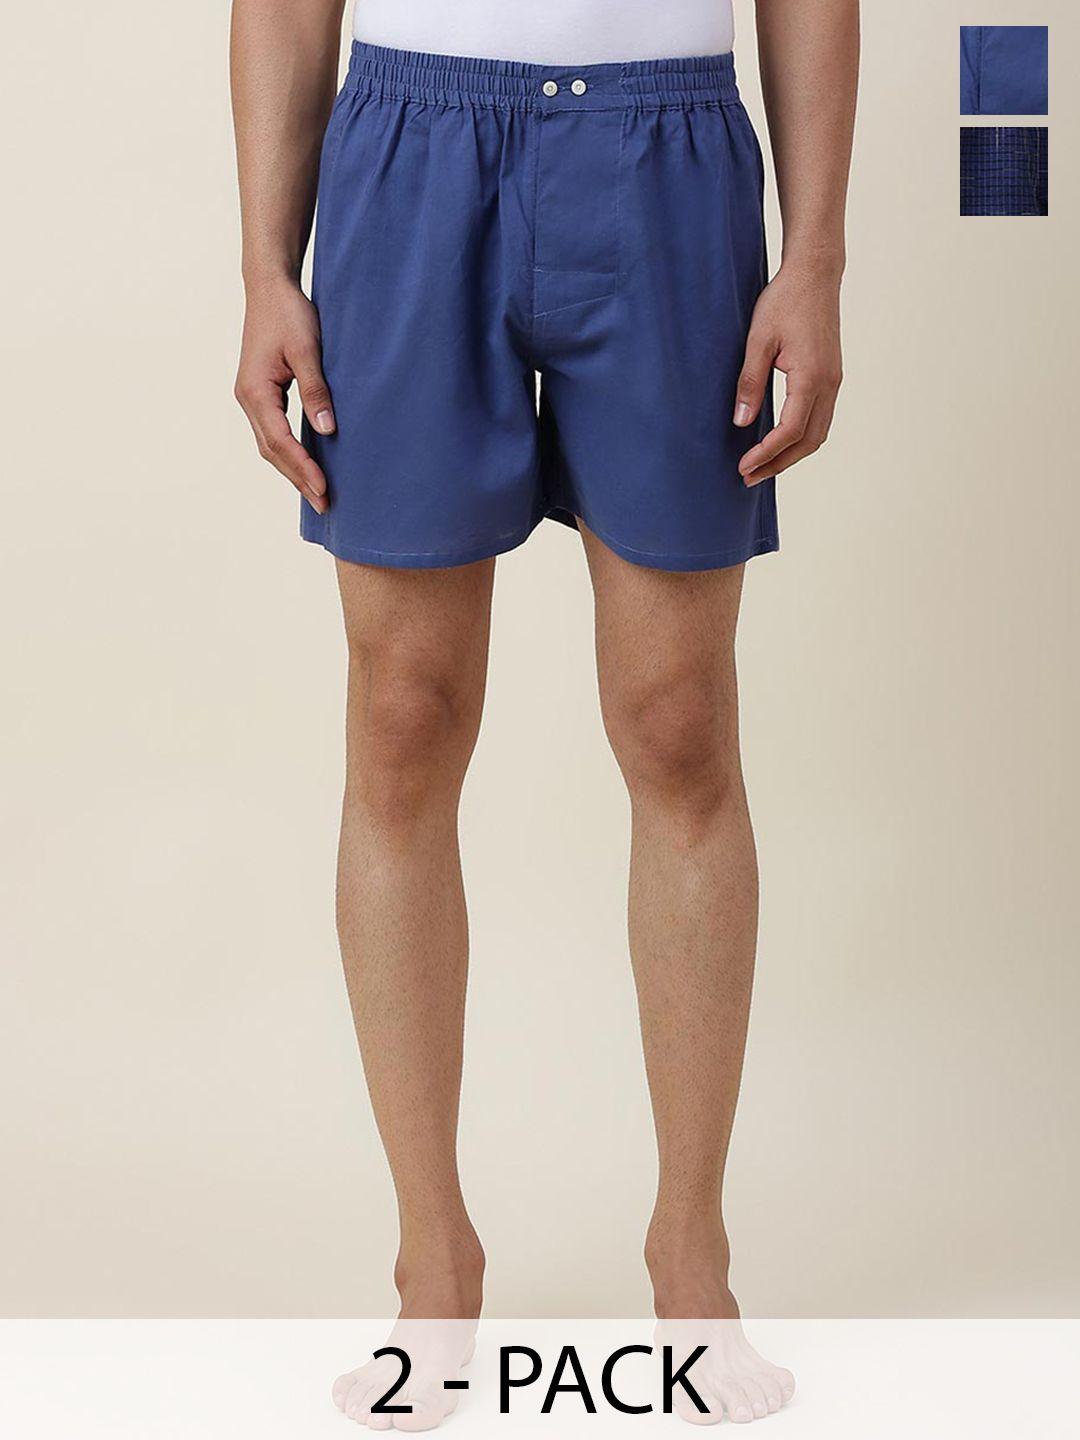 fabindia-men-pack-of-2-mid-rise-above-knee-cotton-shorts